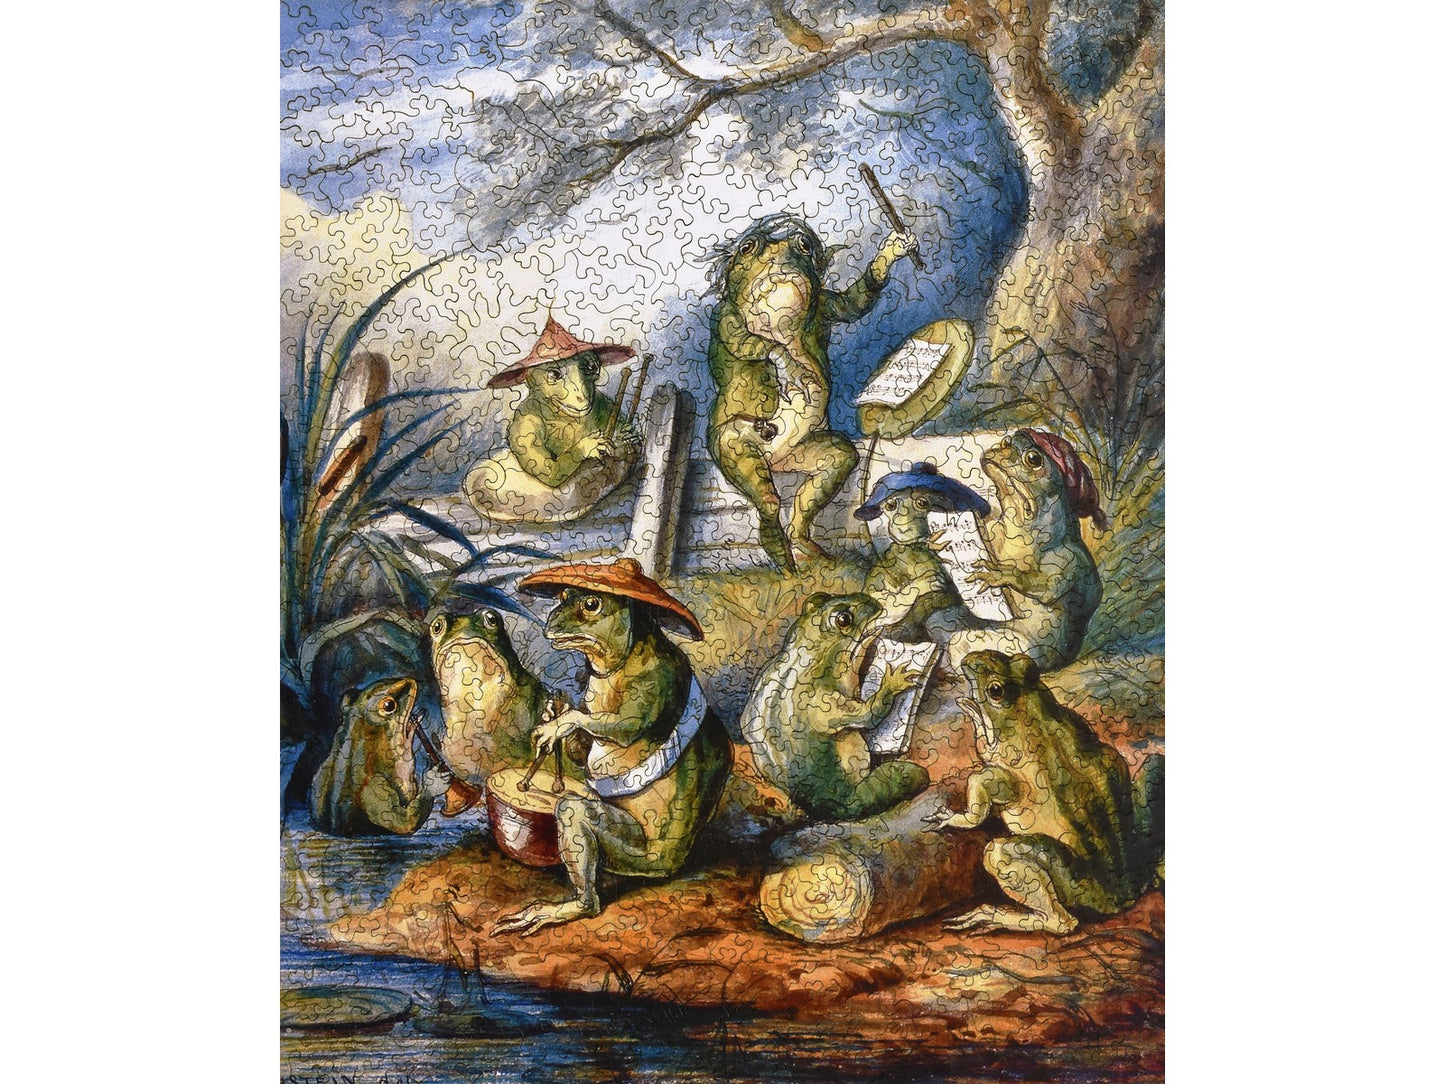 The front of the puzzle, Frog Concert, which shows a group of frogs playing instruments and singing.